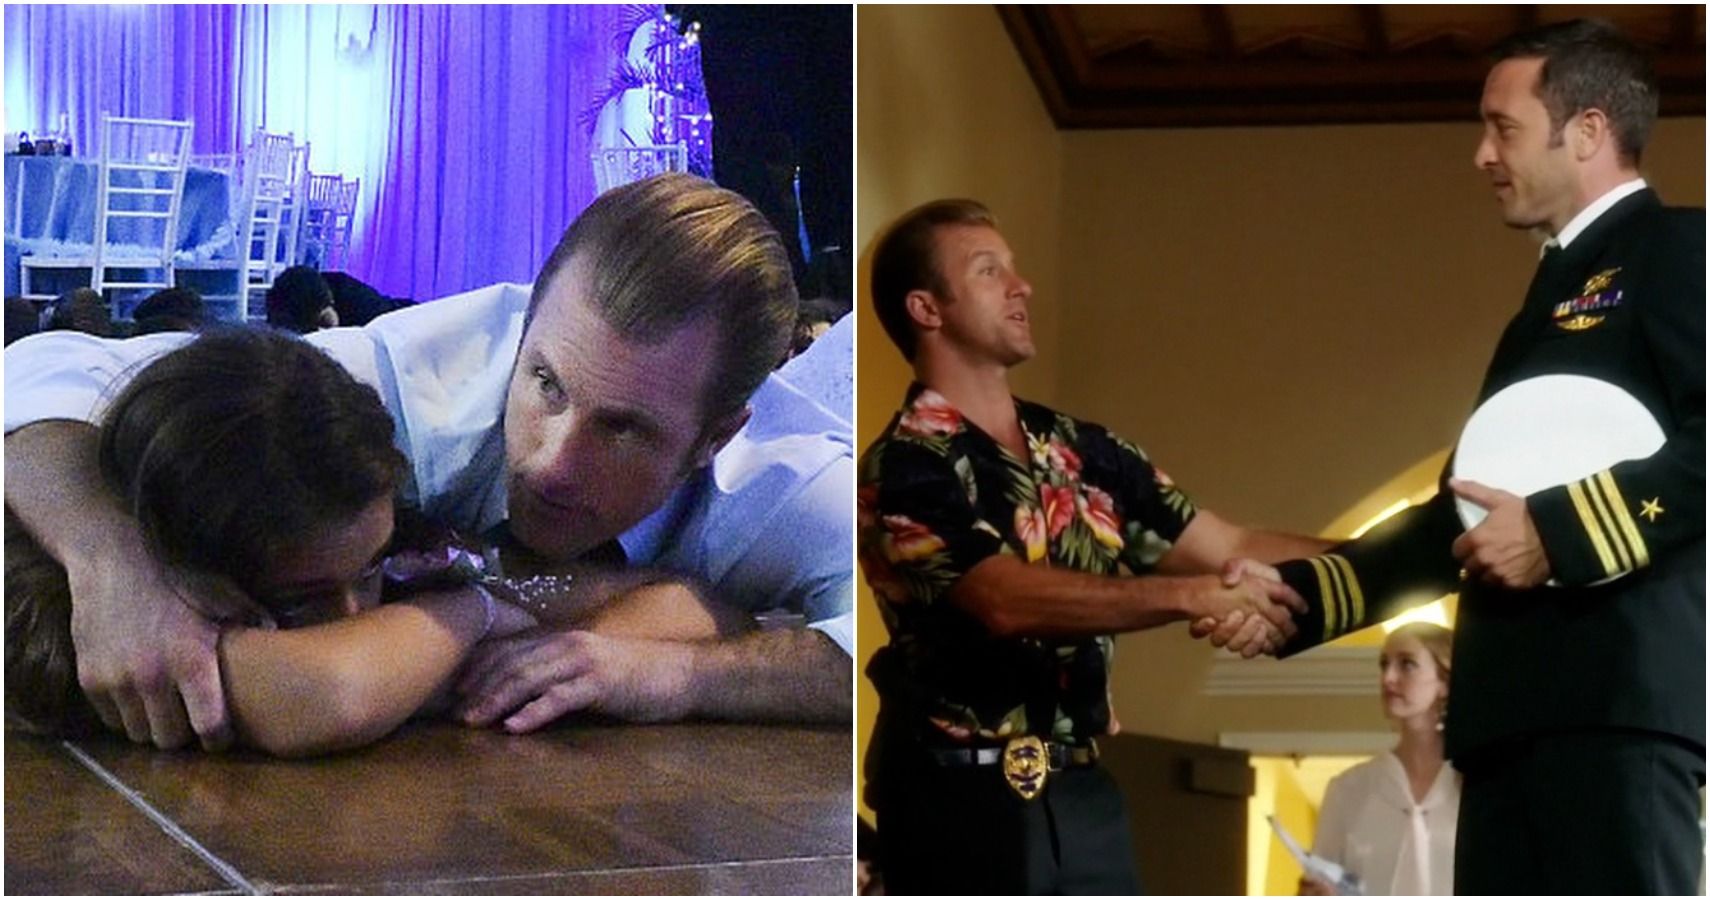 Danny with Grace on left, Danny with Steve on right Hawaii Five-0 split image